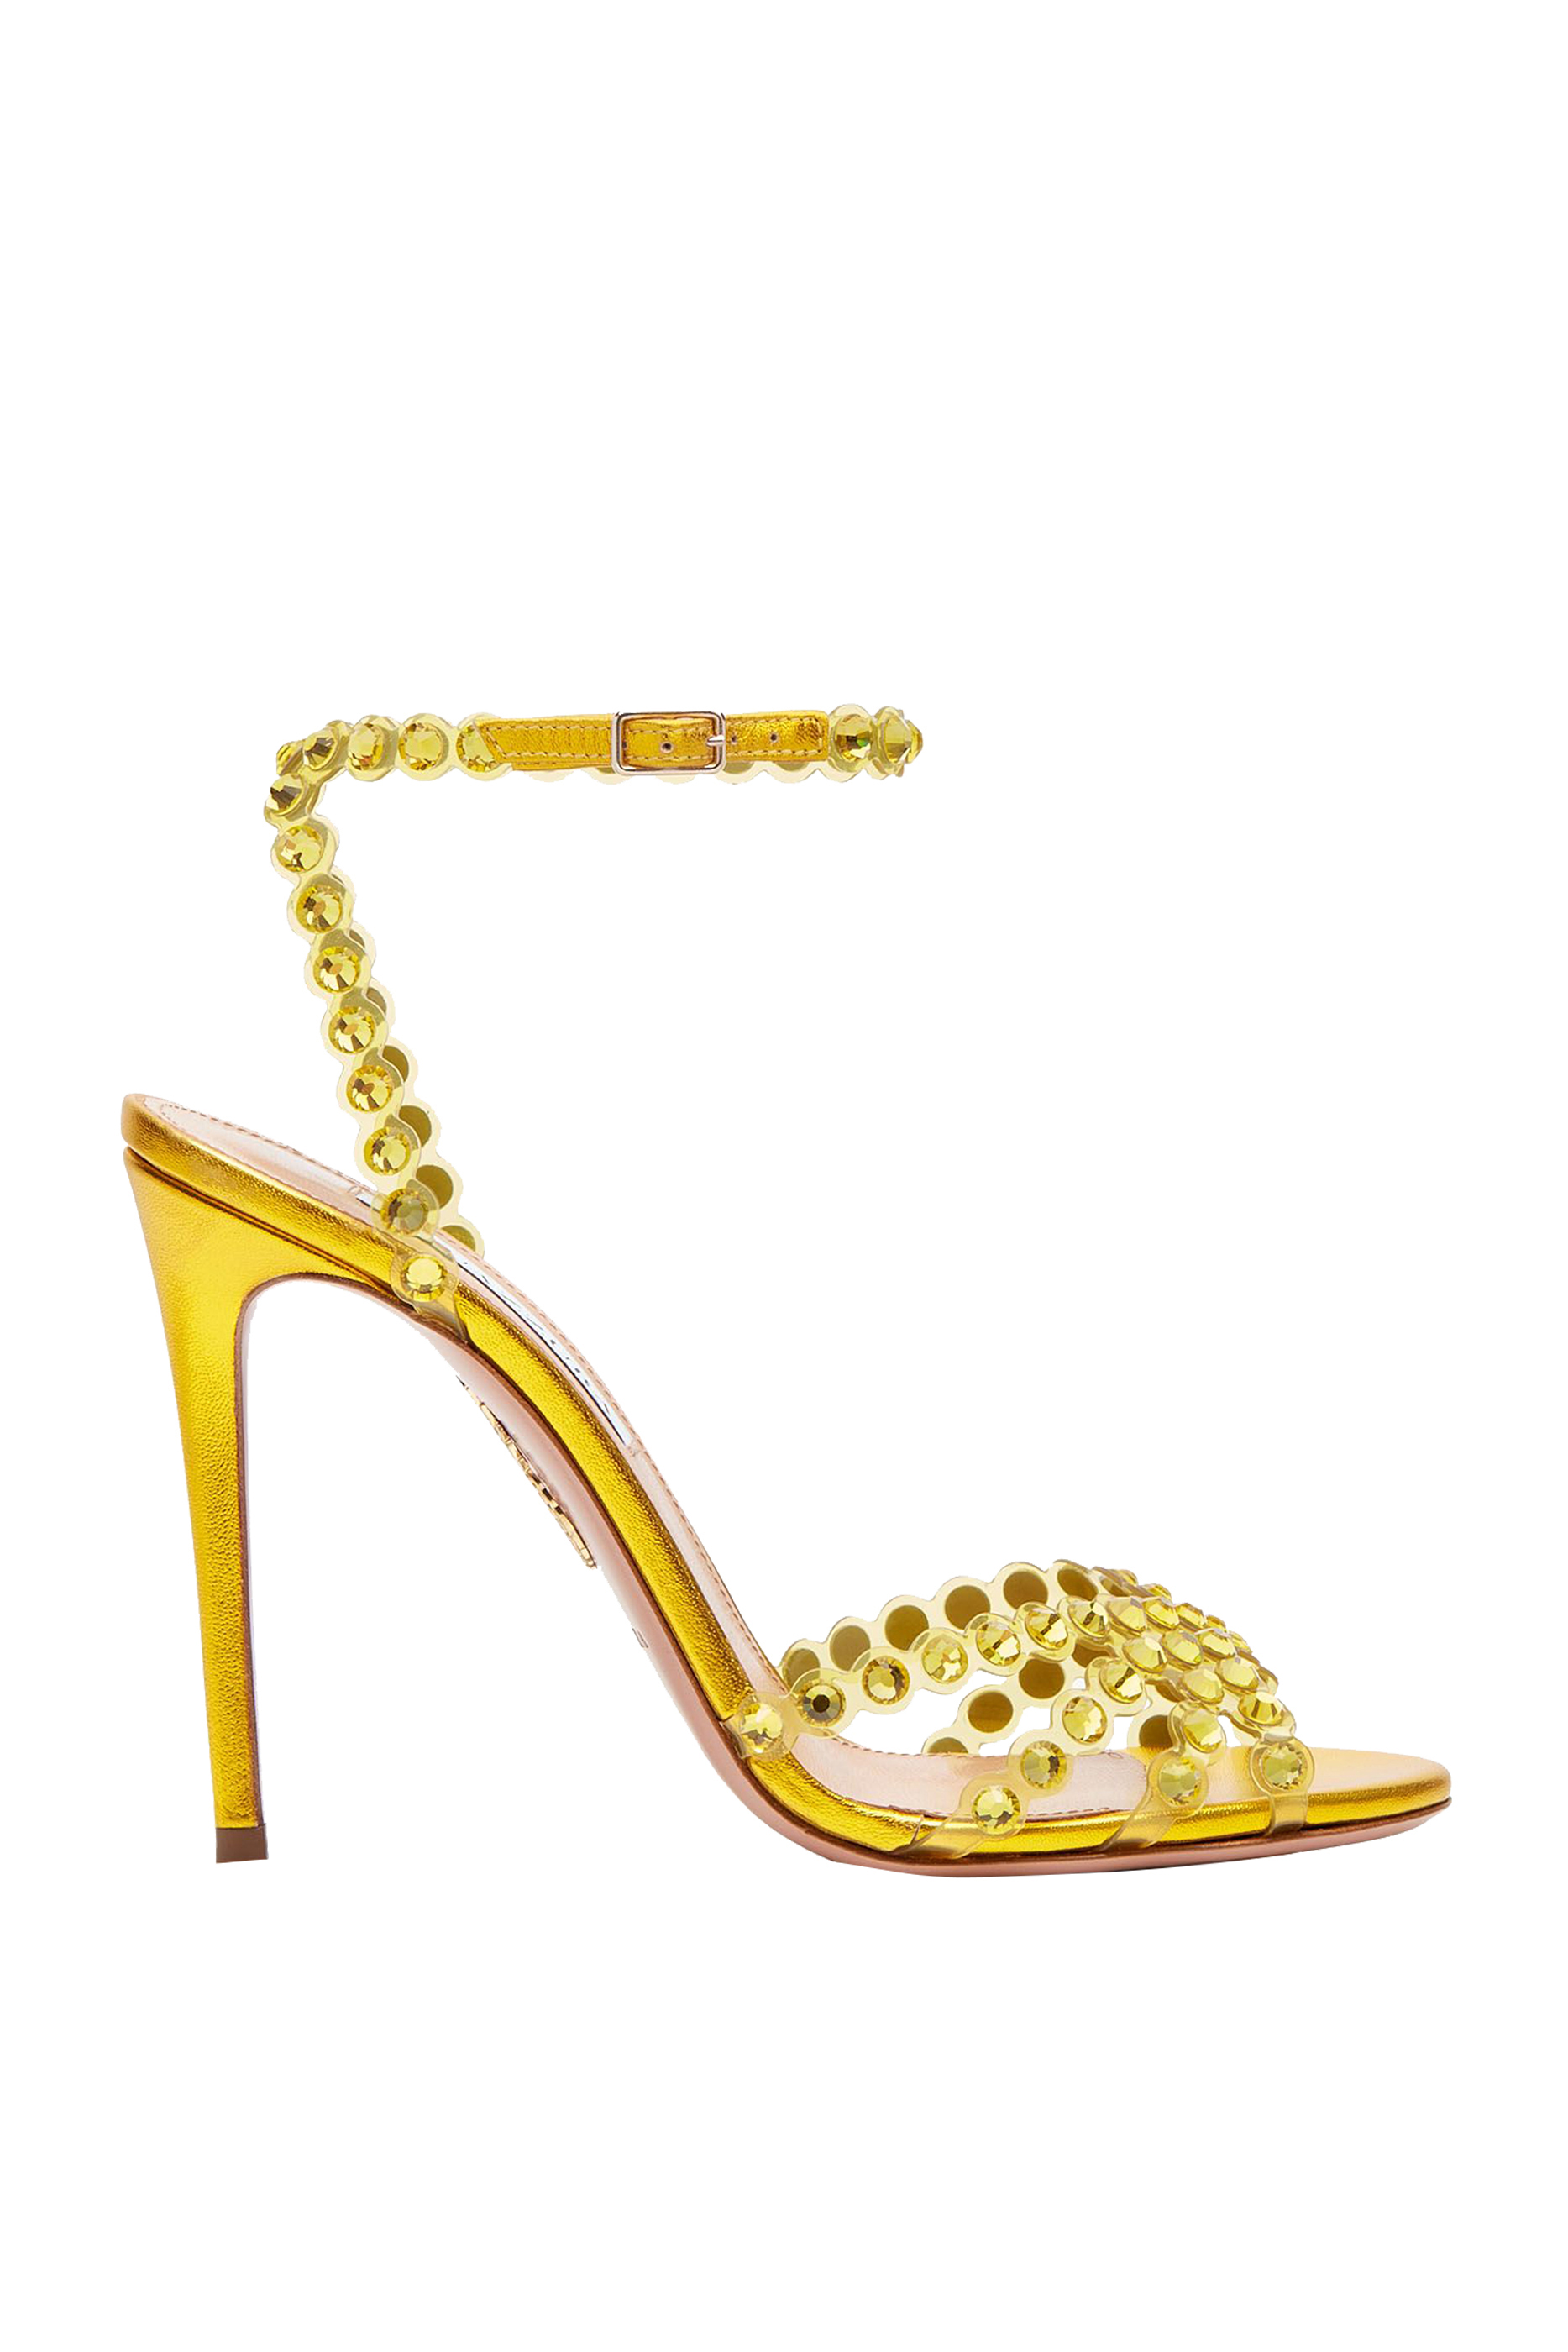 Buy Aquazzura Tequila 105 Embellished Sandals for Womens | Bloomingdale ...